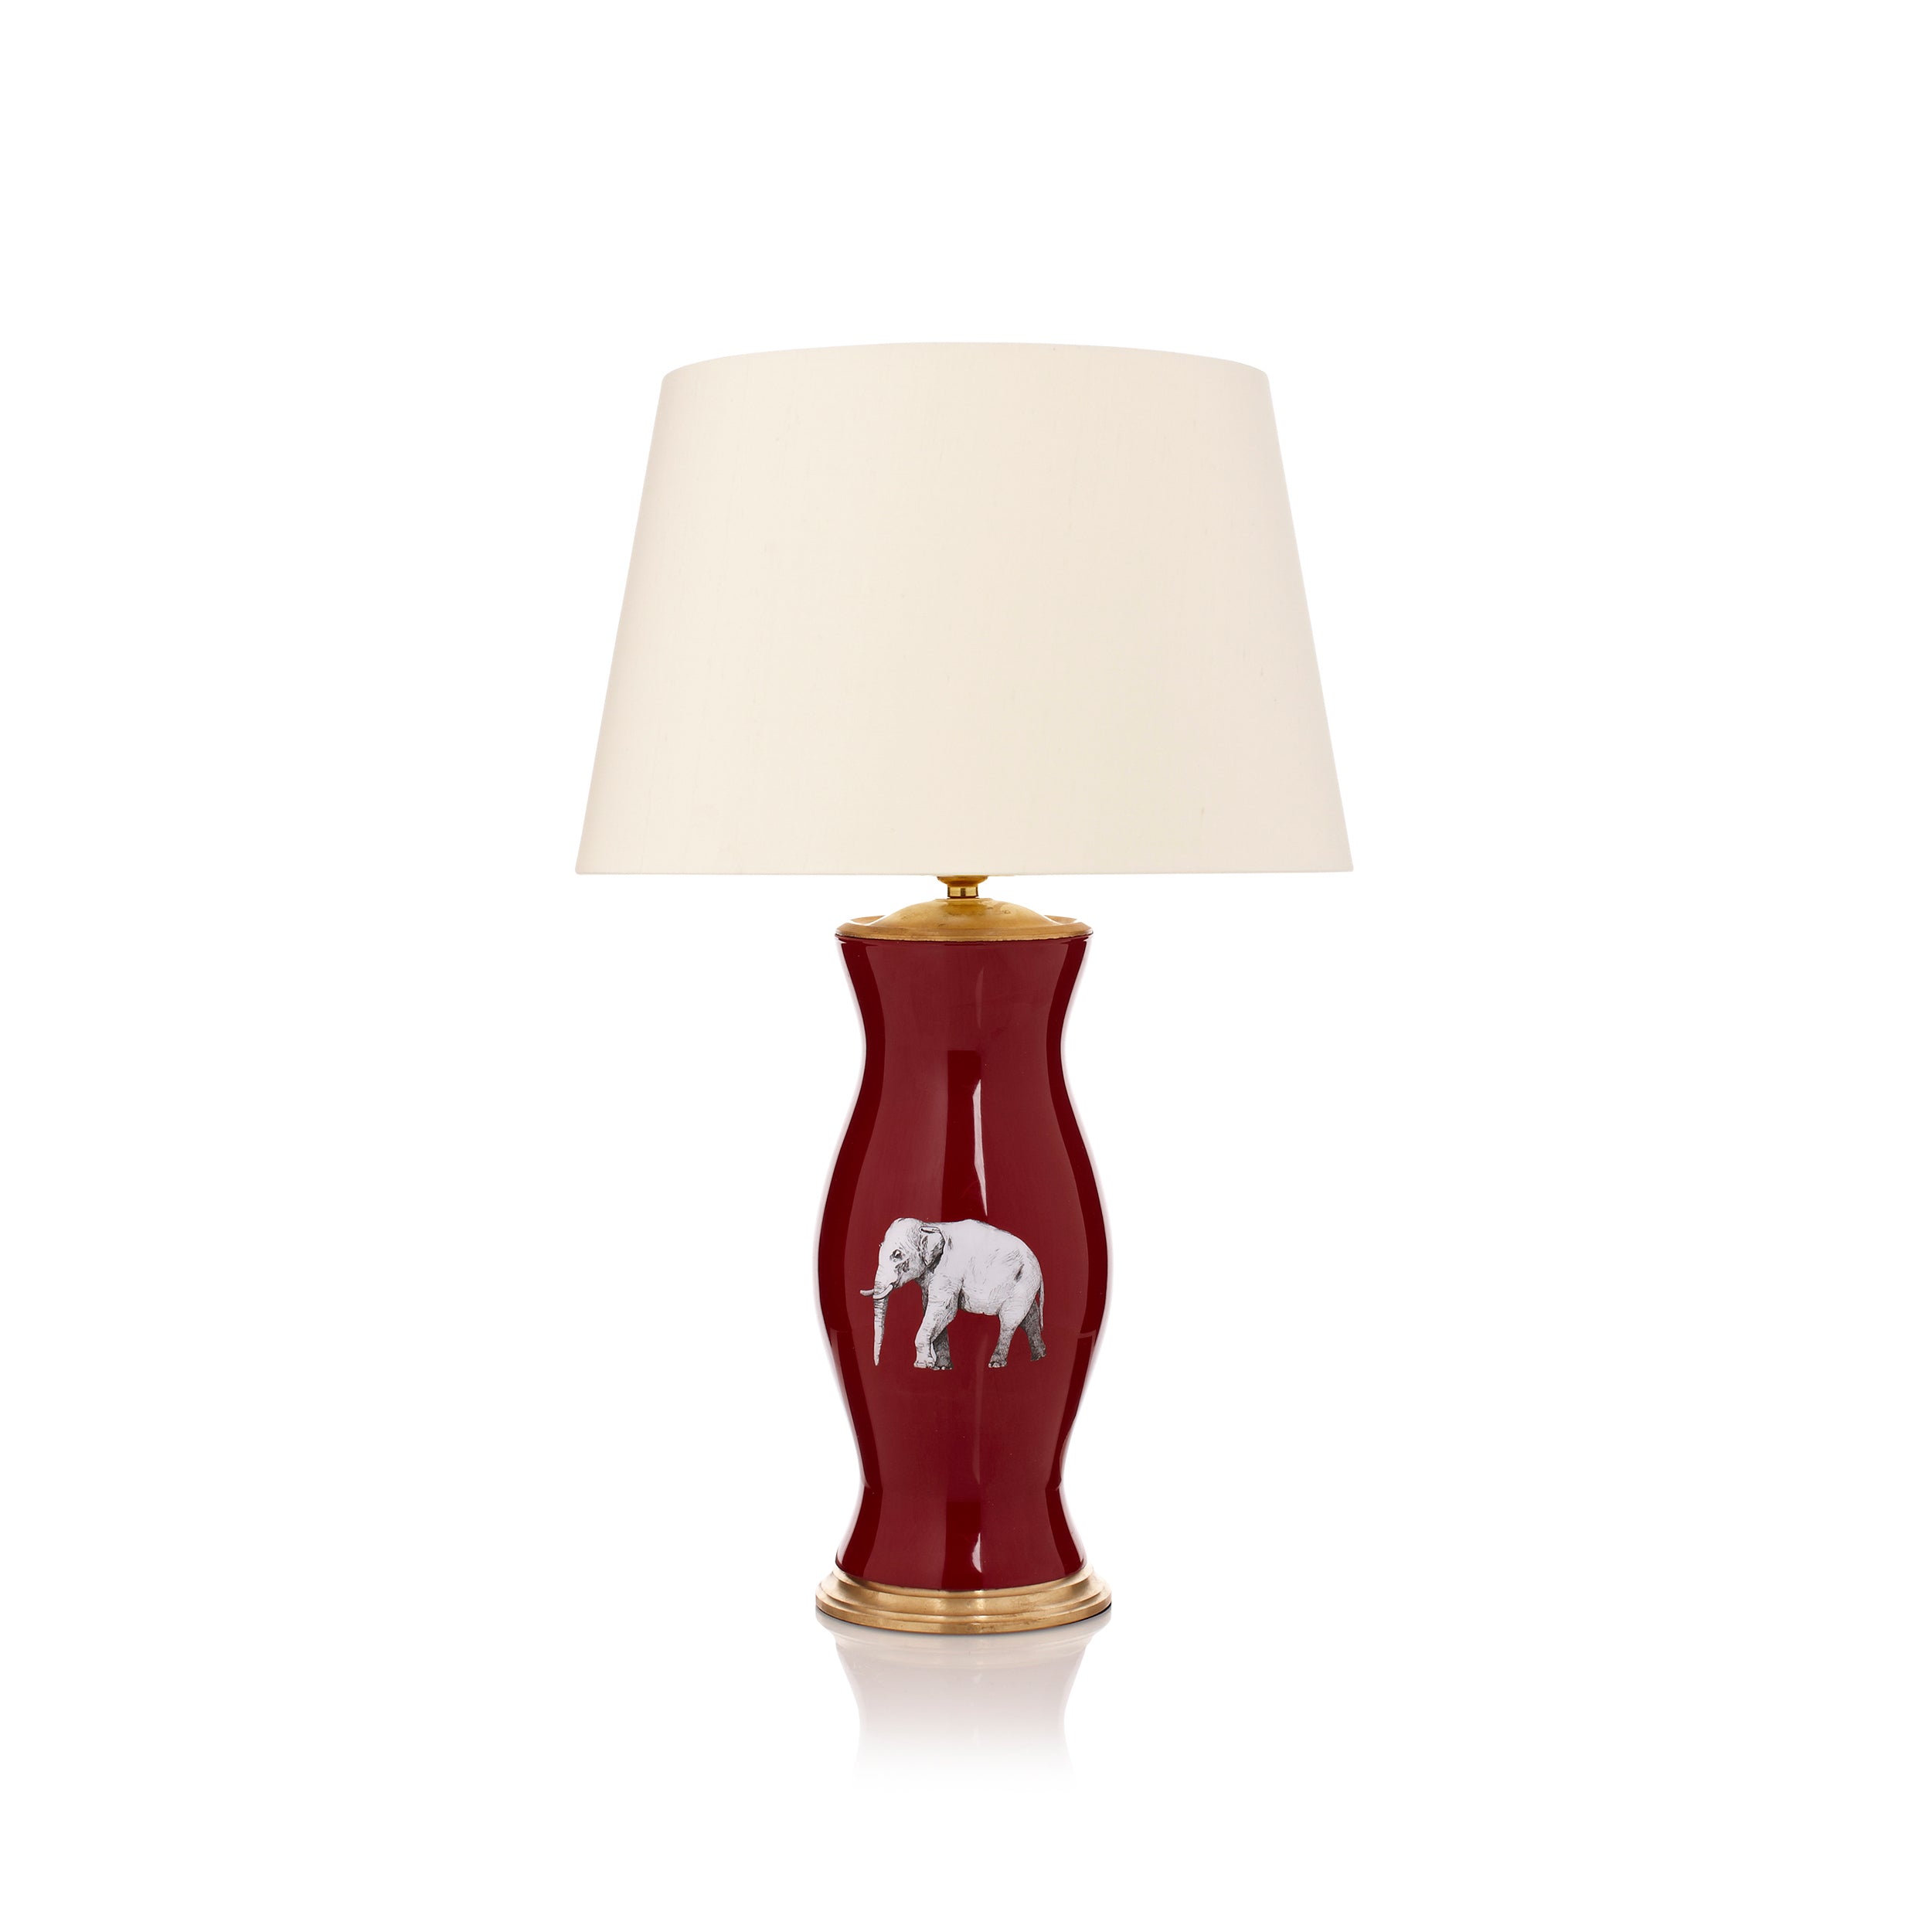 THE ELEPHANT IN THE ROOM LAMP BASE